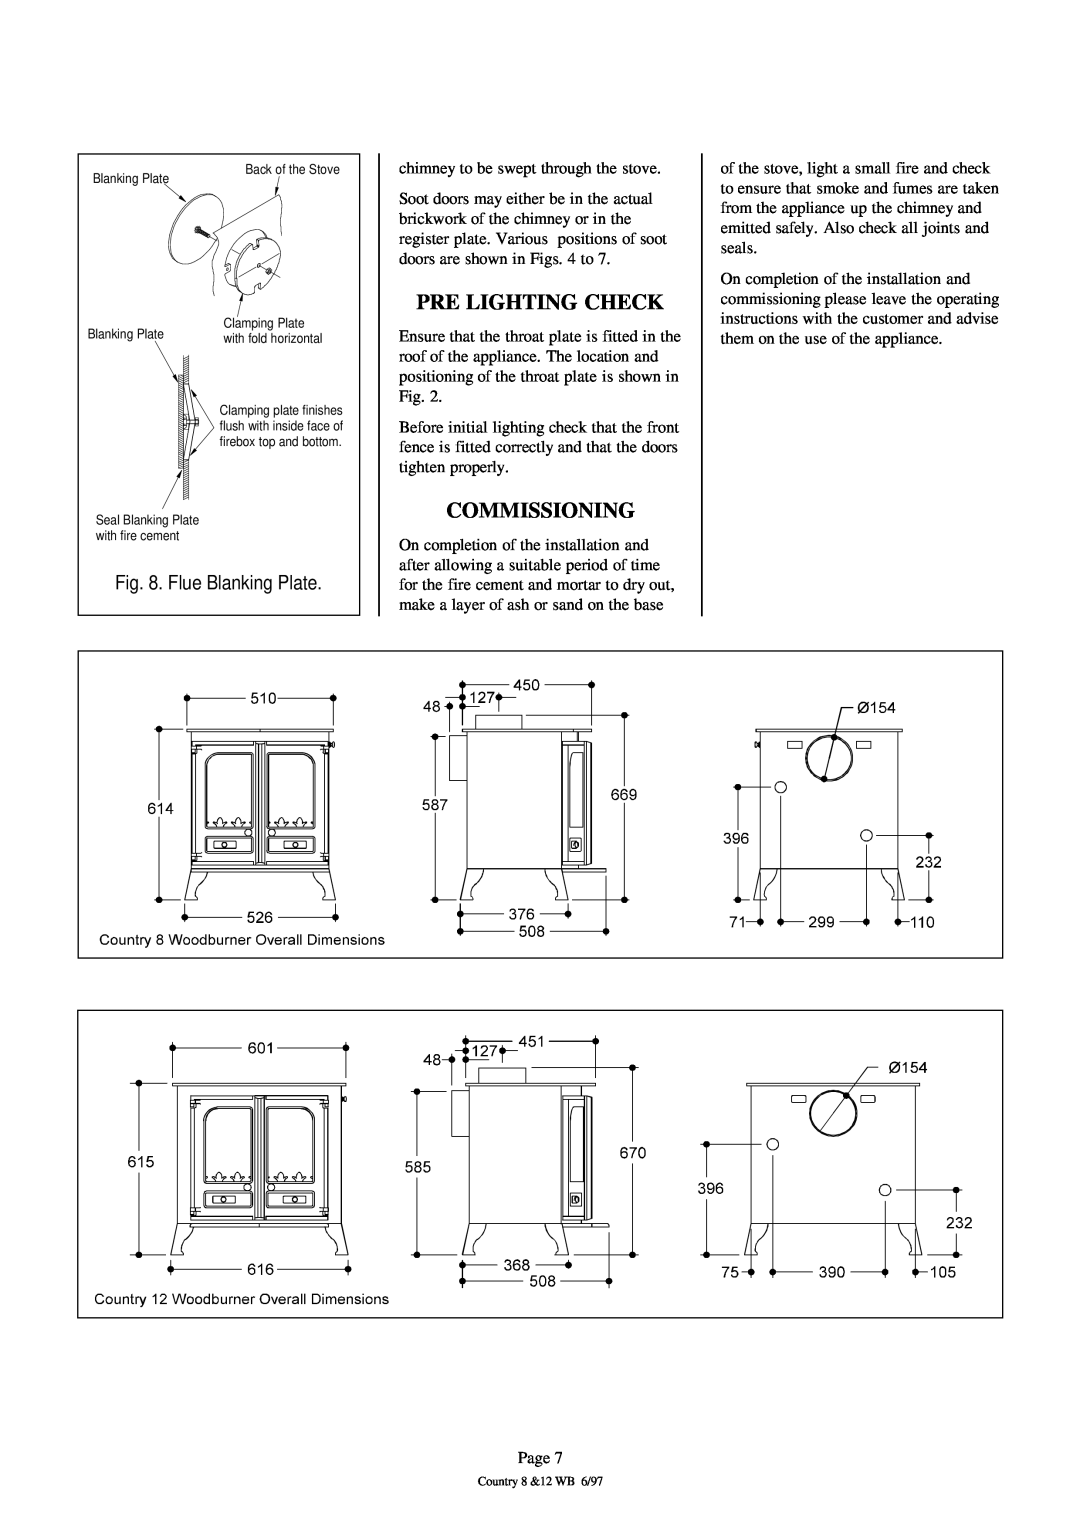 Charnwood WOODBURNER installation instructions Pre Lighting Check, Commissioning, Flue Blanking Plate 